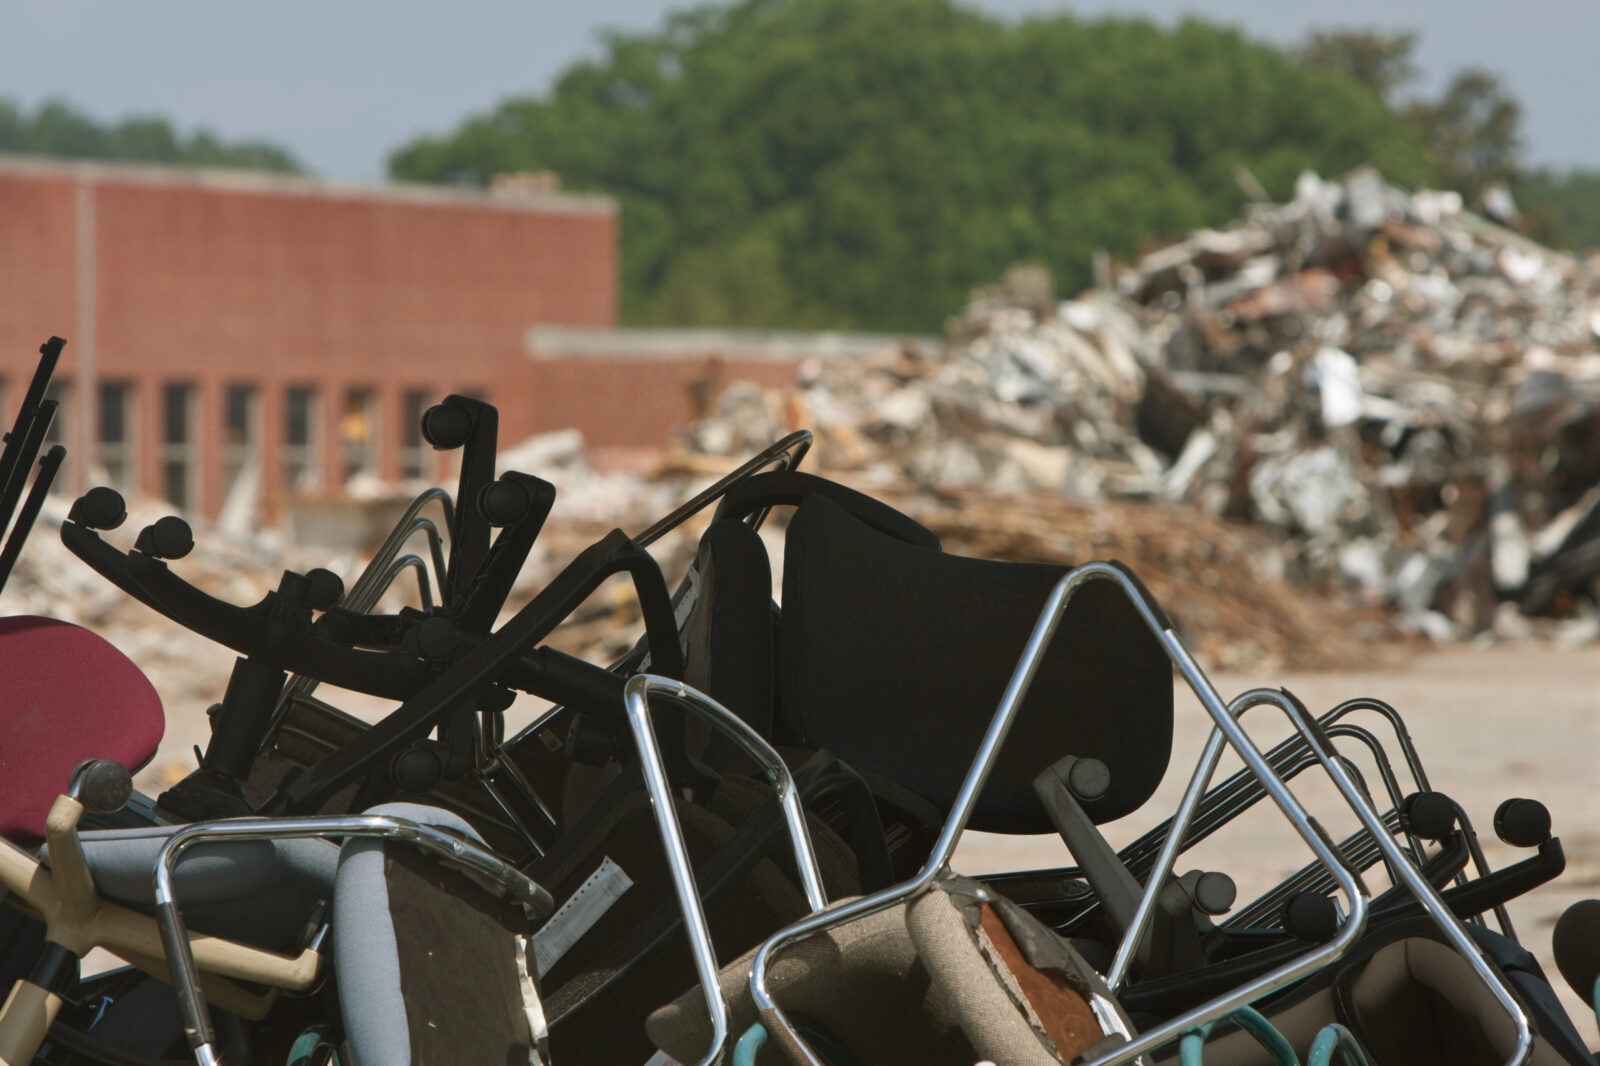 Office furniture and equipment in landfill